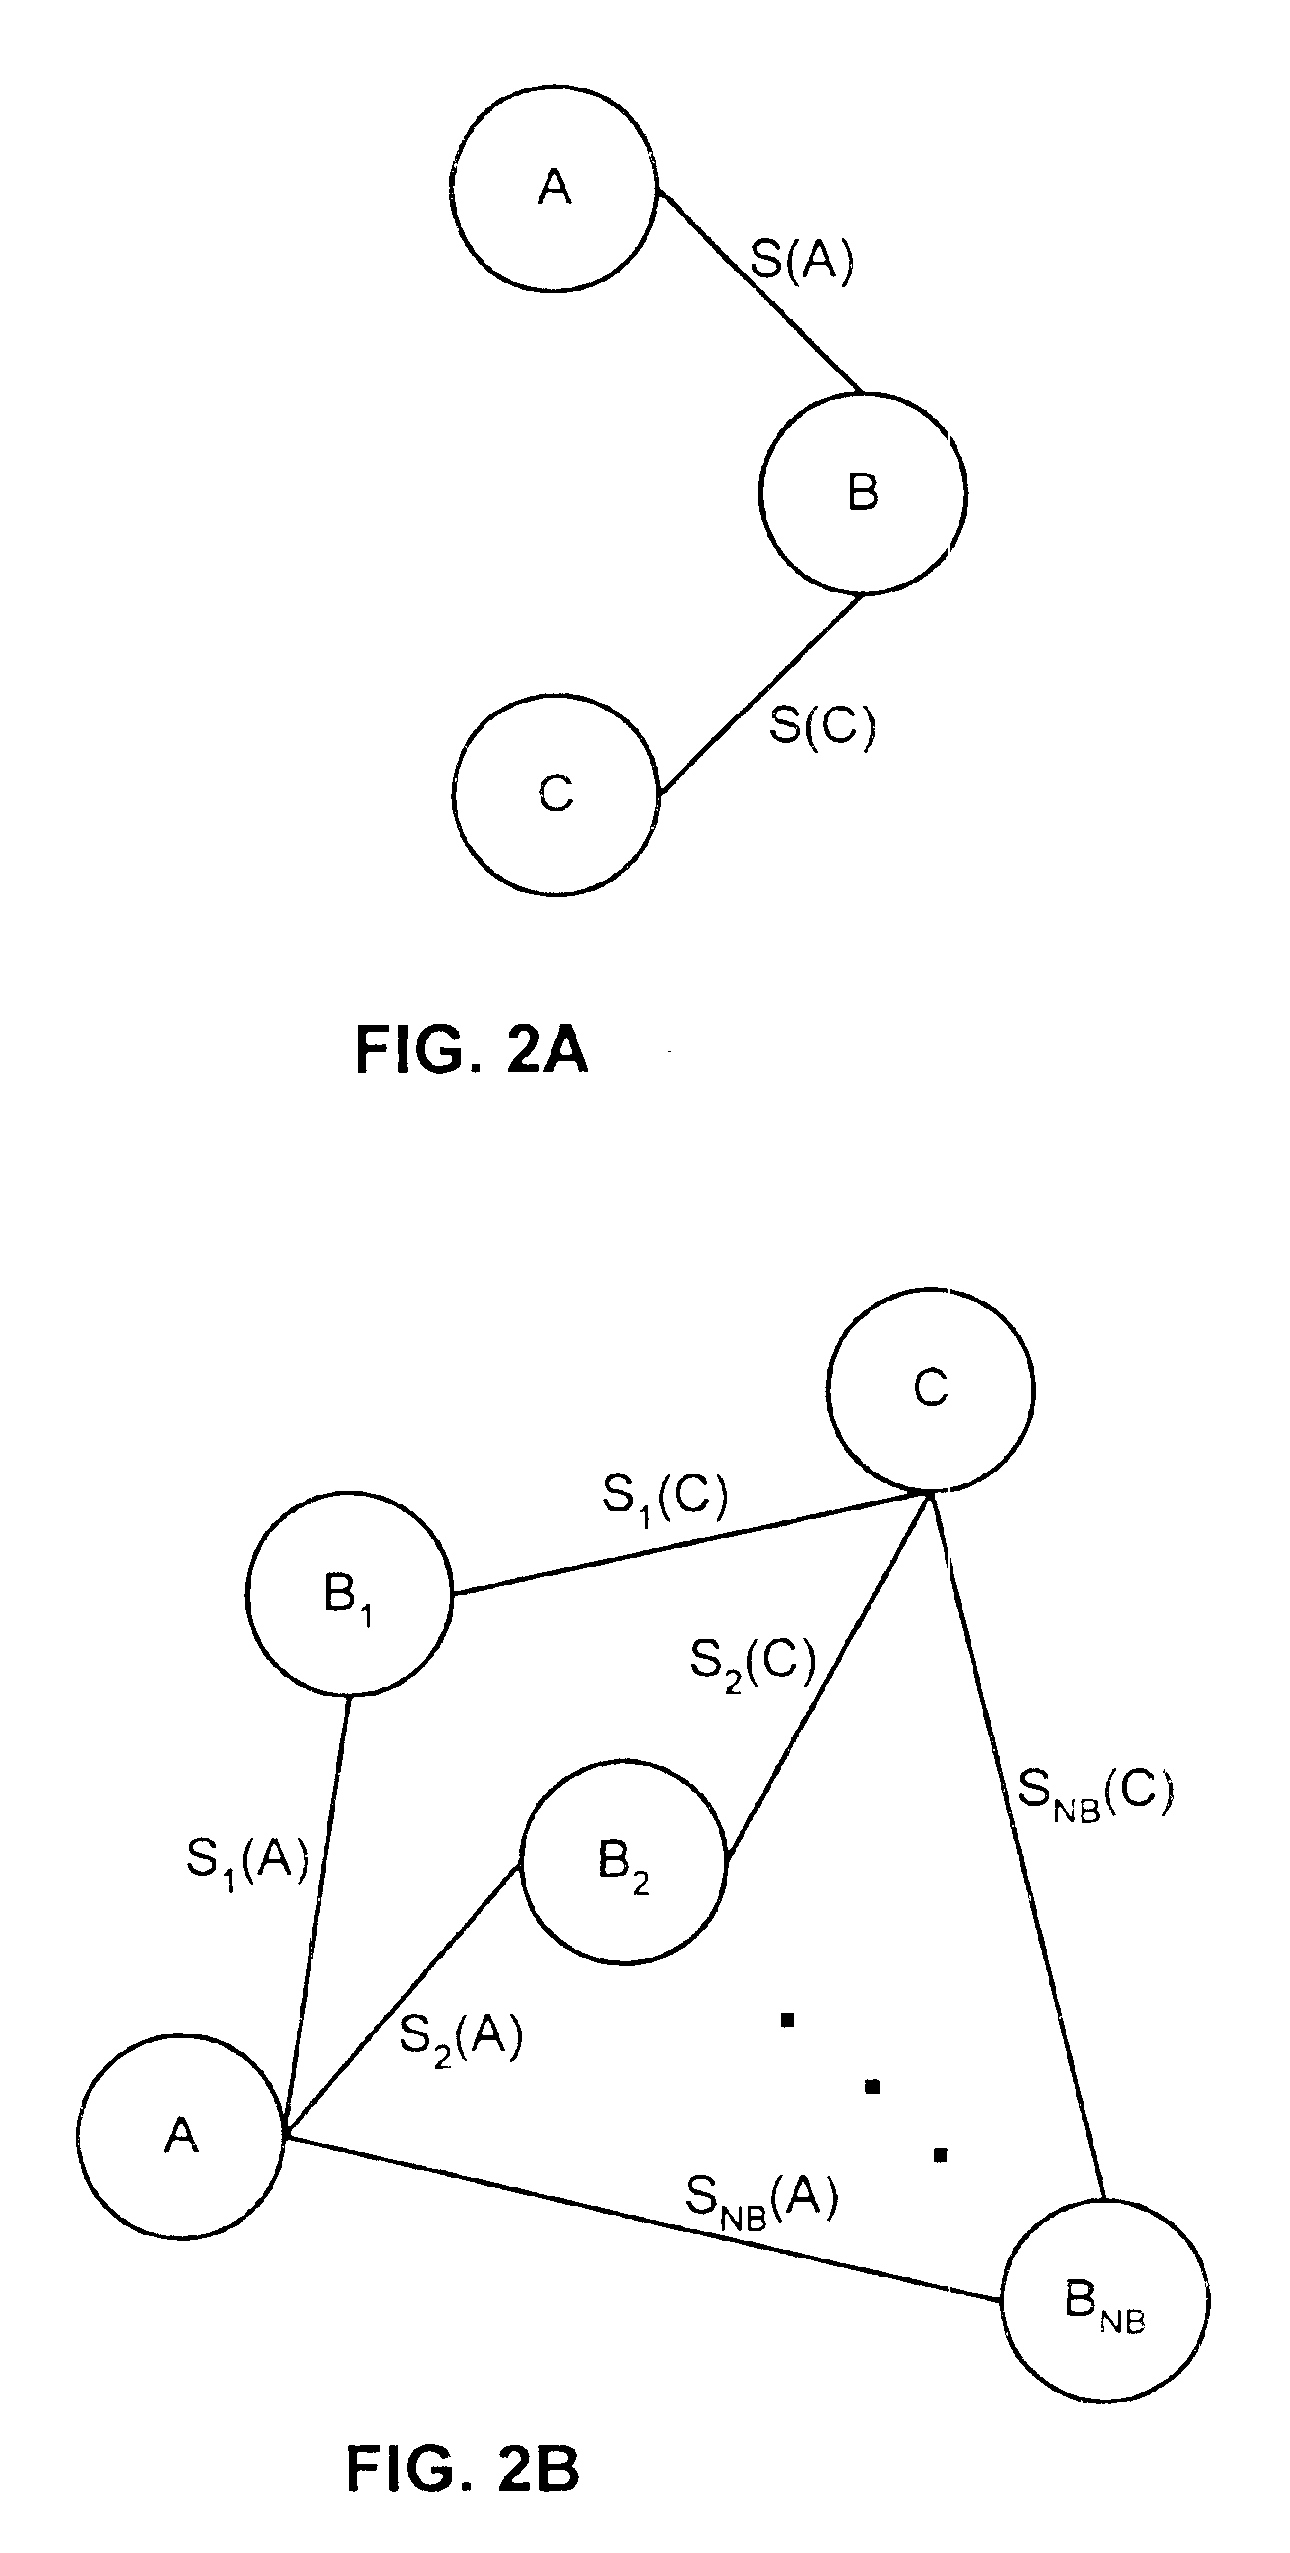 Method and system of transitive matching for object recognition, in particular for biometric searches